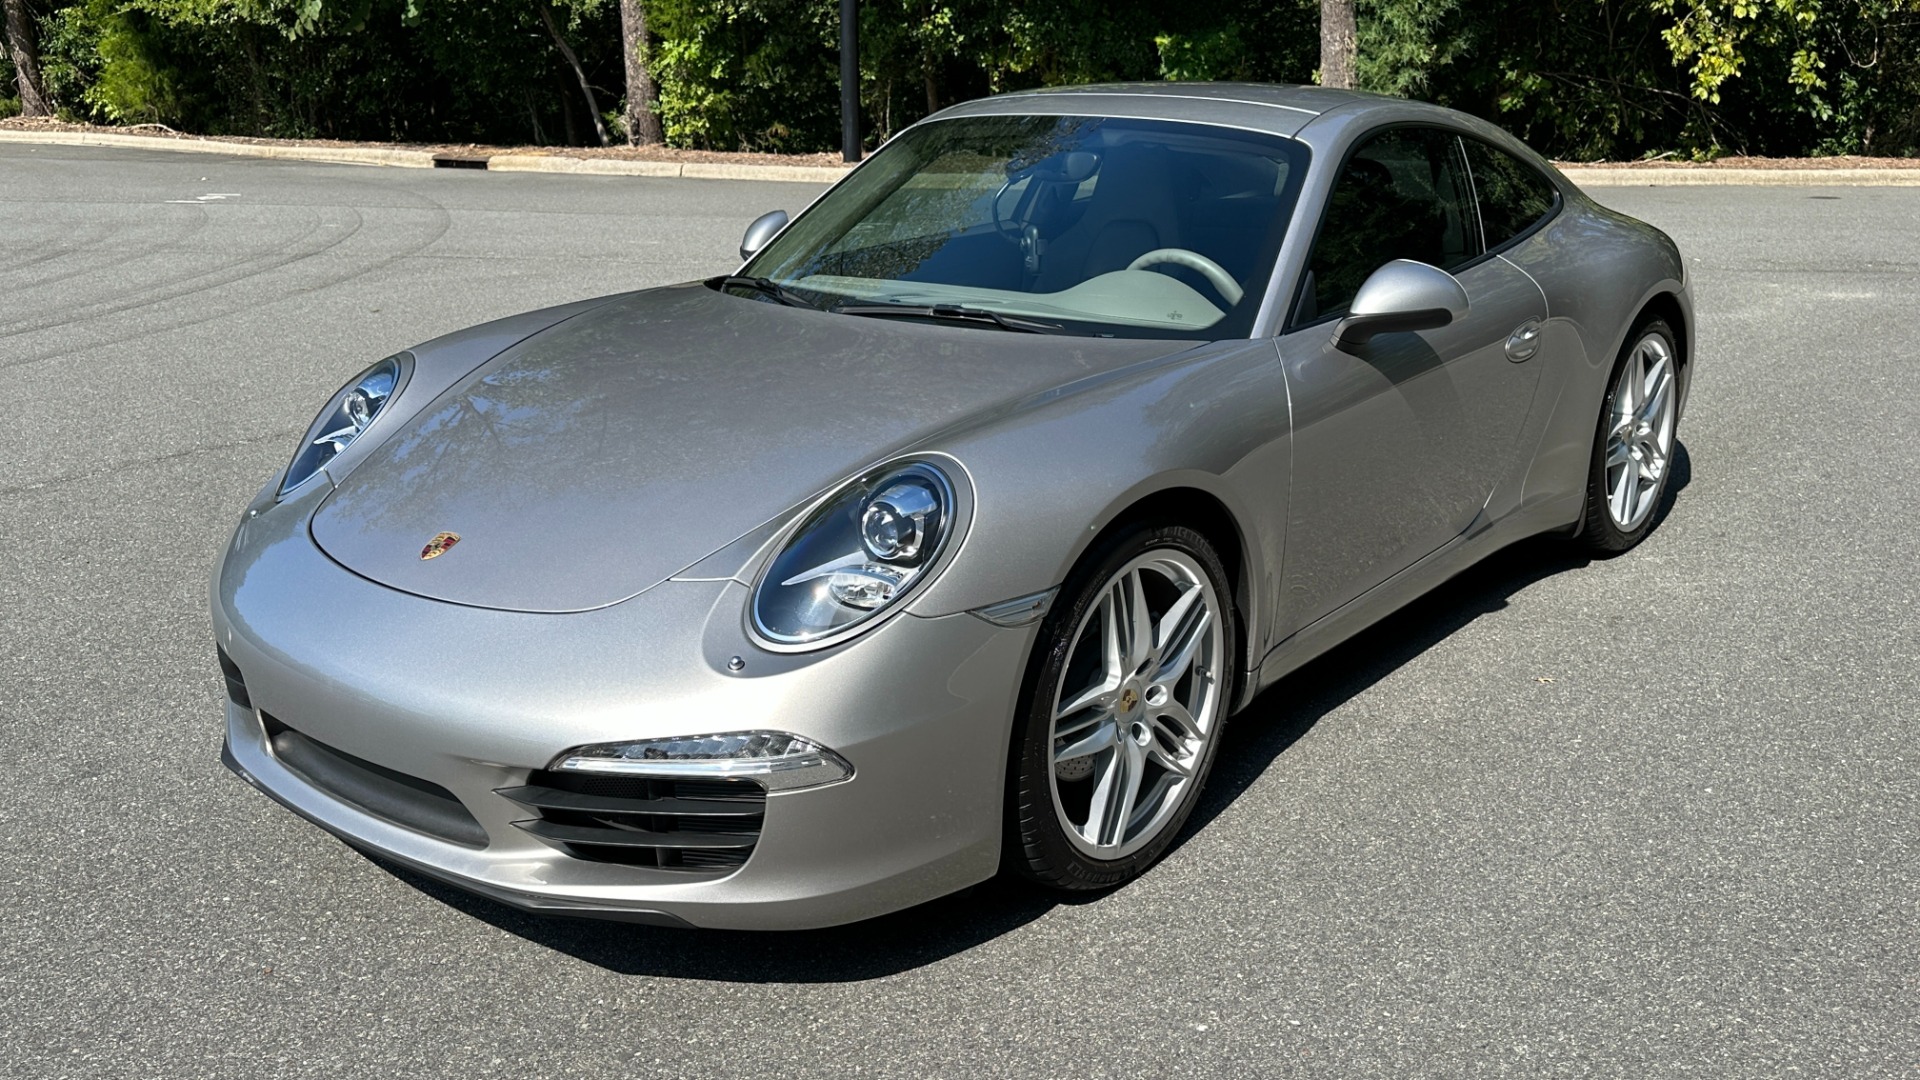 Used 2012 Porsche 911 991 CARRERA / PREMIUM PKG PLUS / SPORT EXHAUST / SPORT SEATS for sale Sold at Formula Imports in Charlotte NC 28227 5